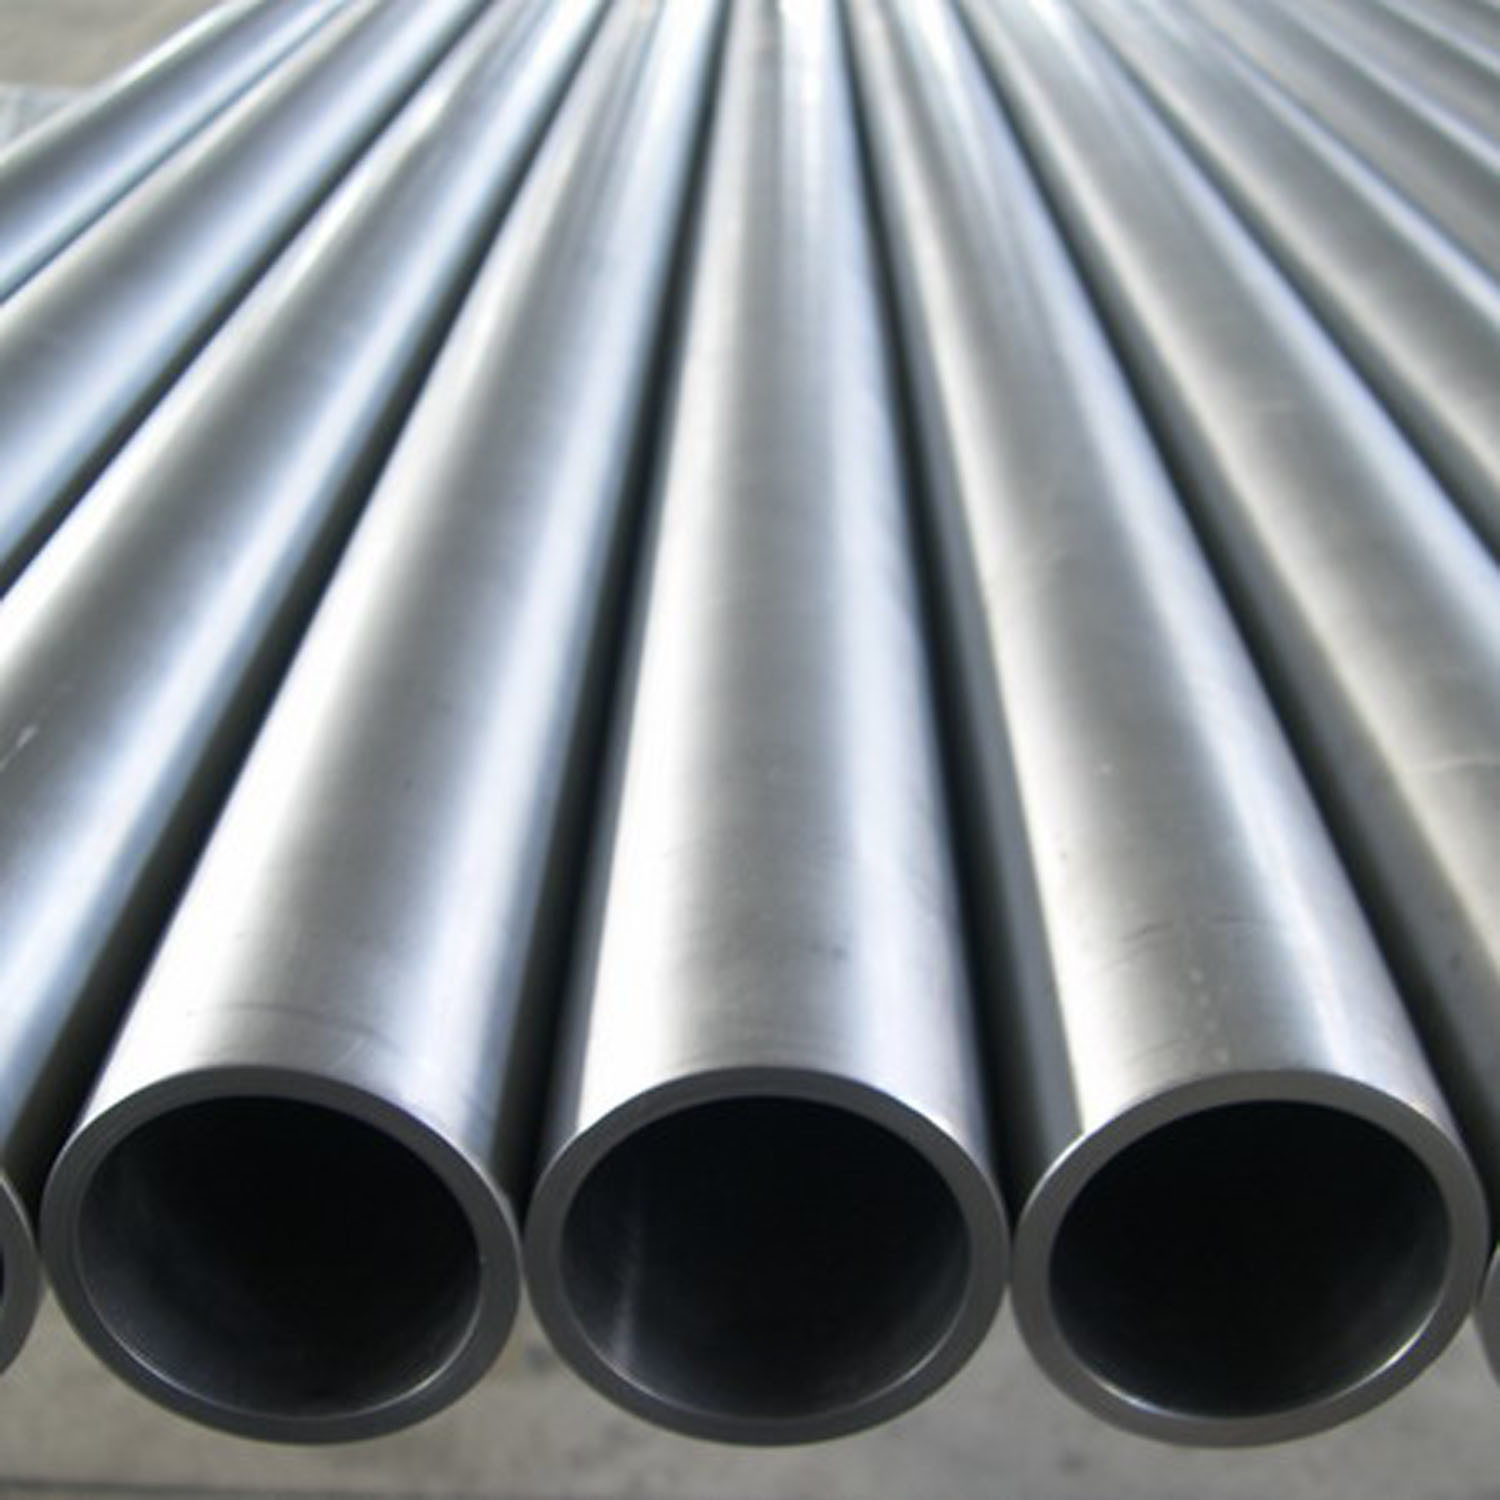 What are the heat treatment processes for welded steel pipes